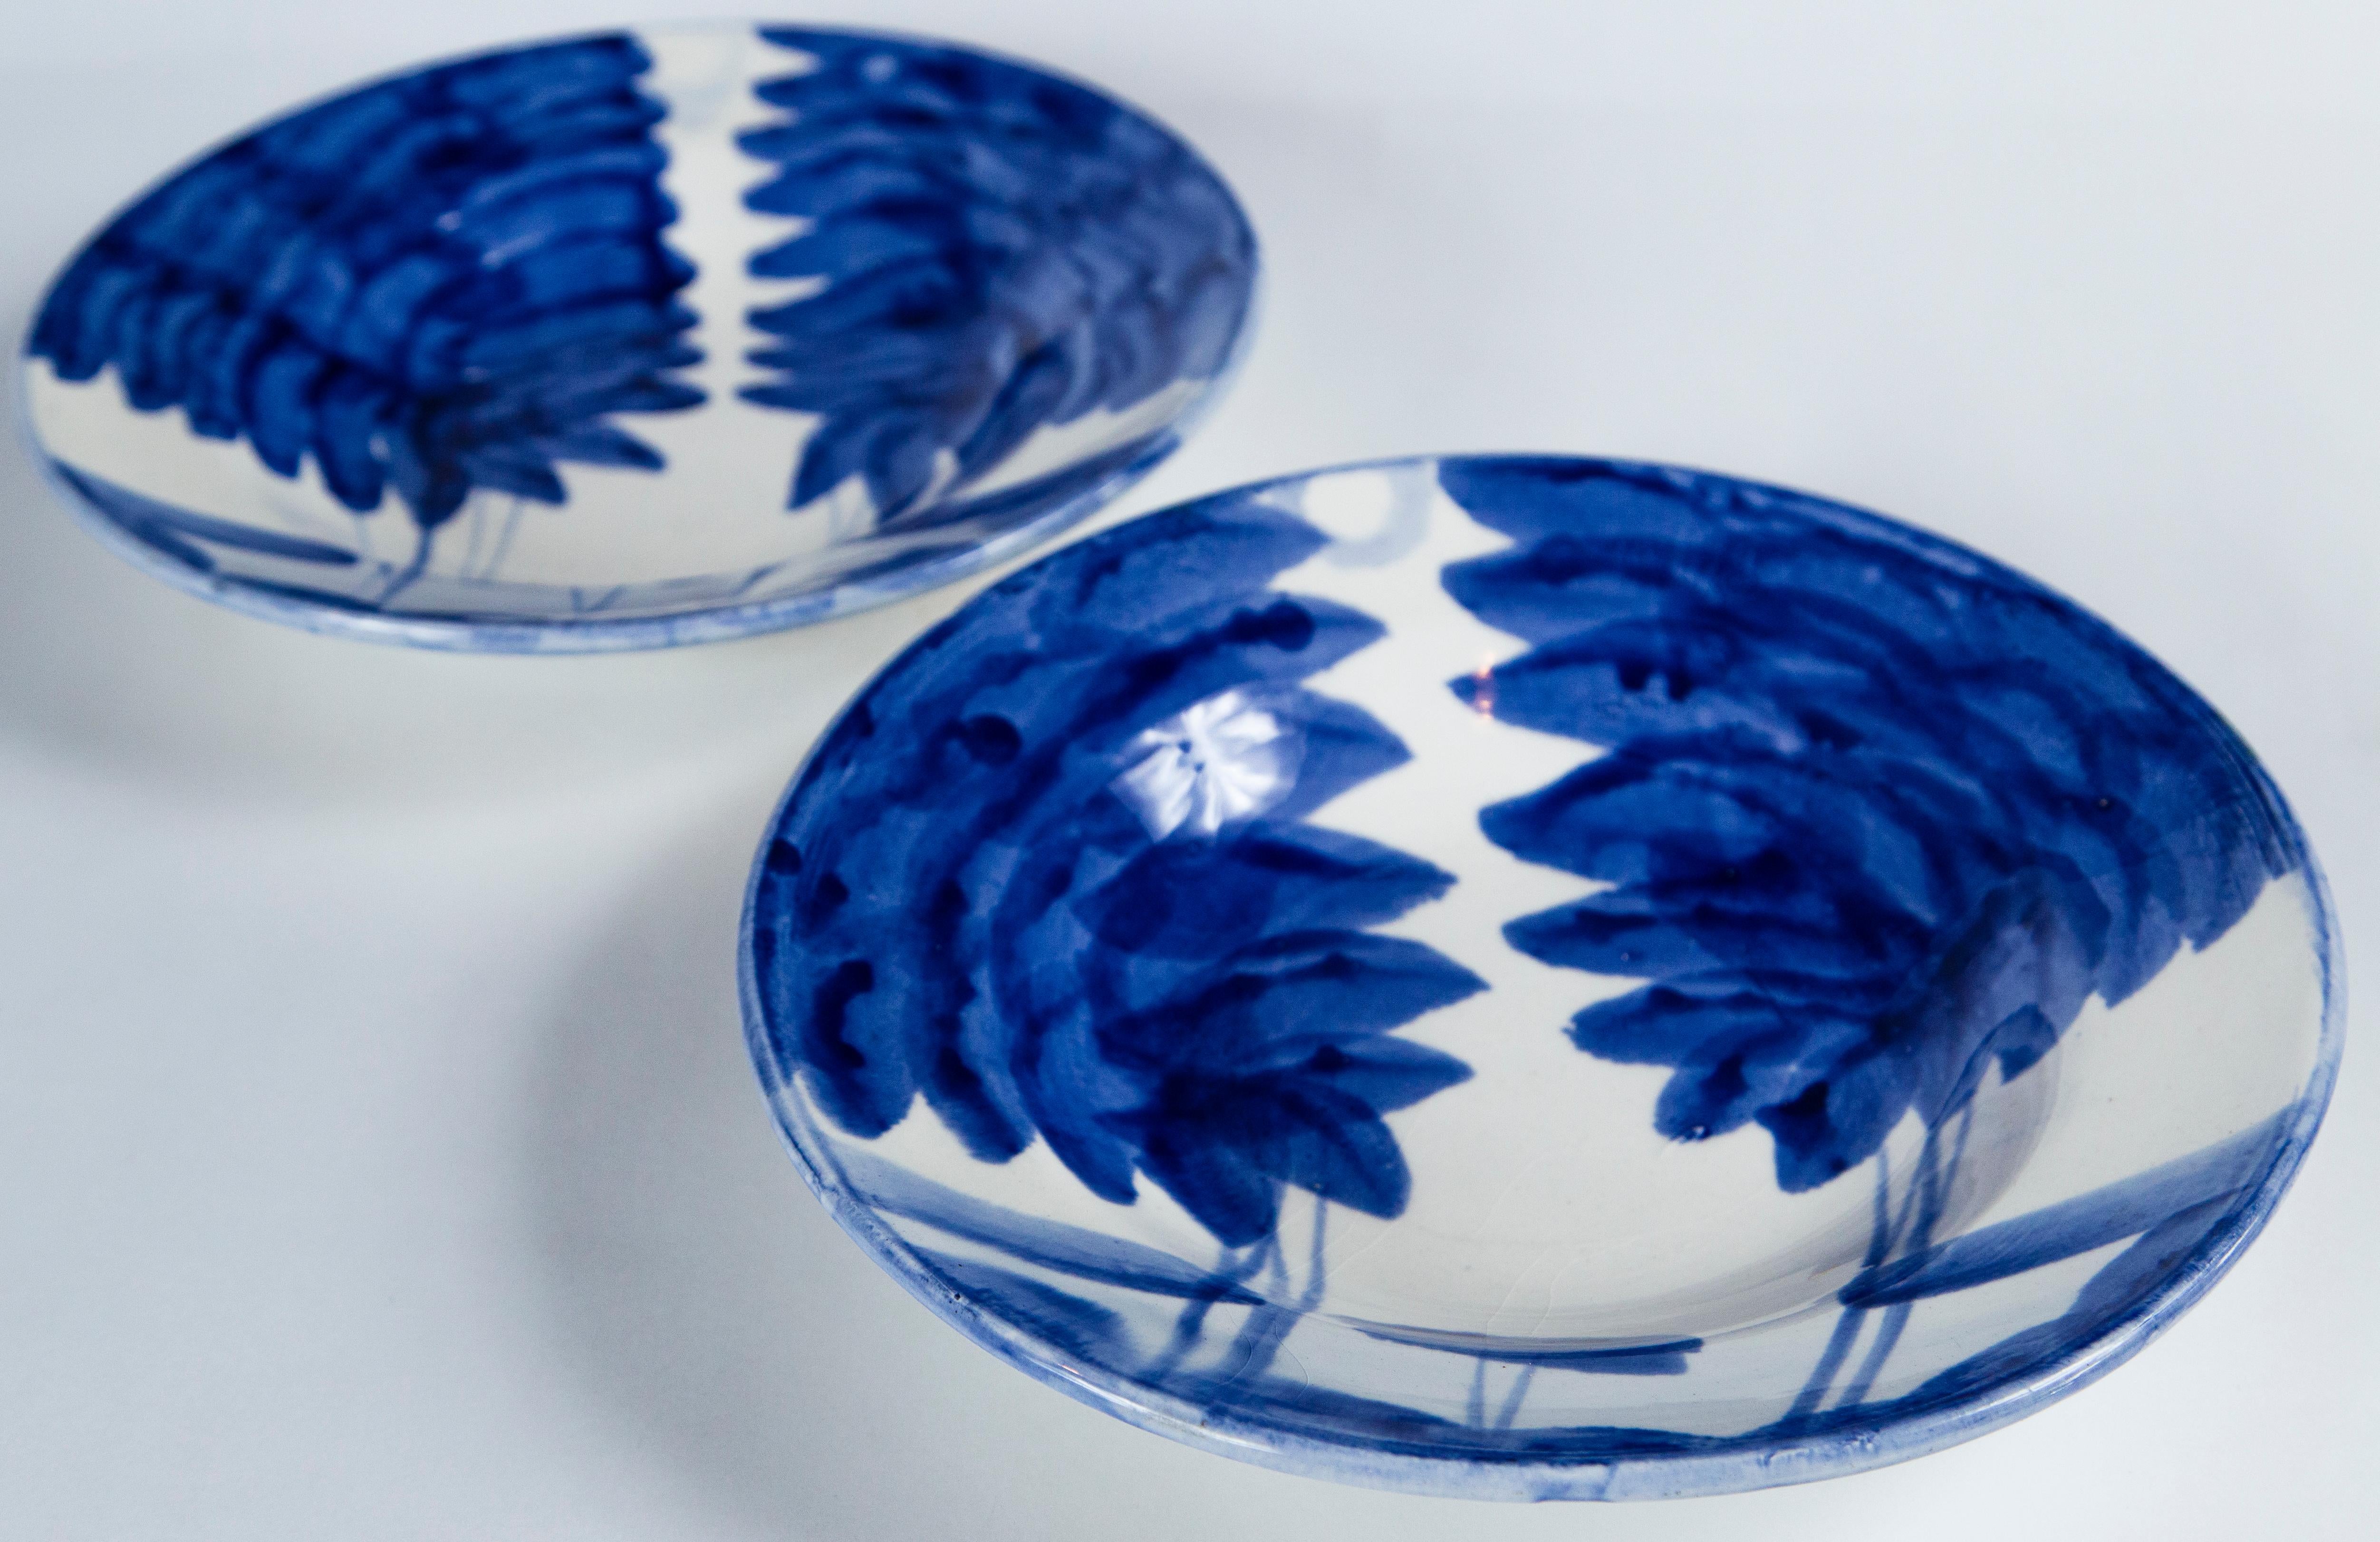 Pair of hand painted blue and white bowls, Europe, mid-20th century. Abstract design with a rich blue glaze on white ground.